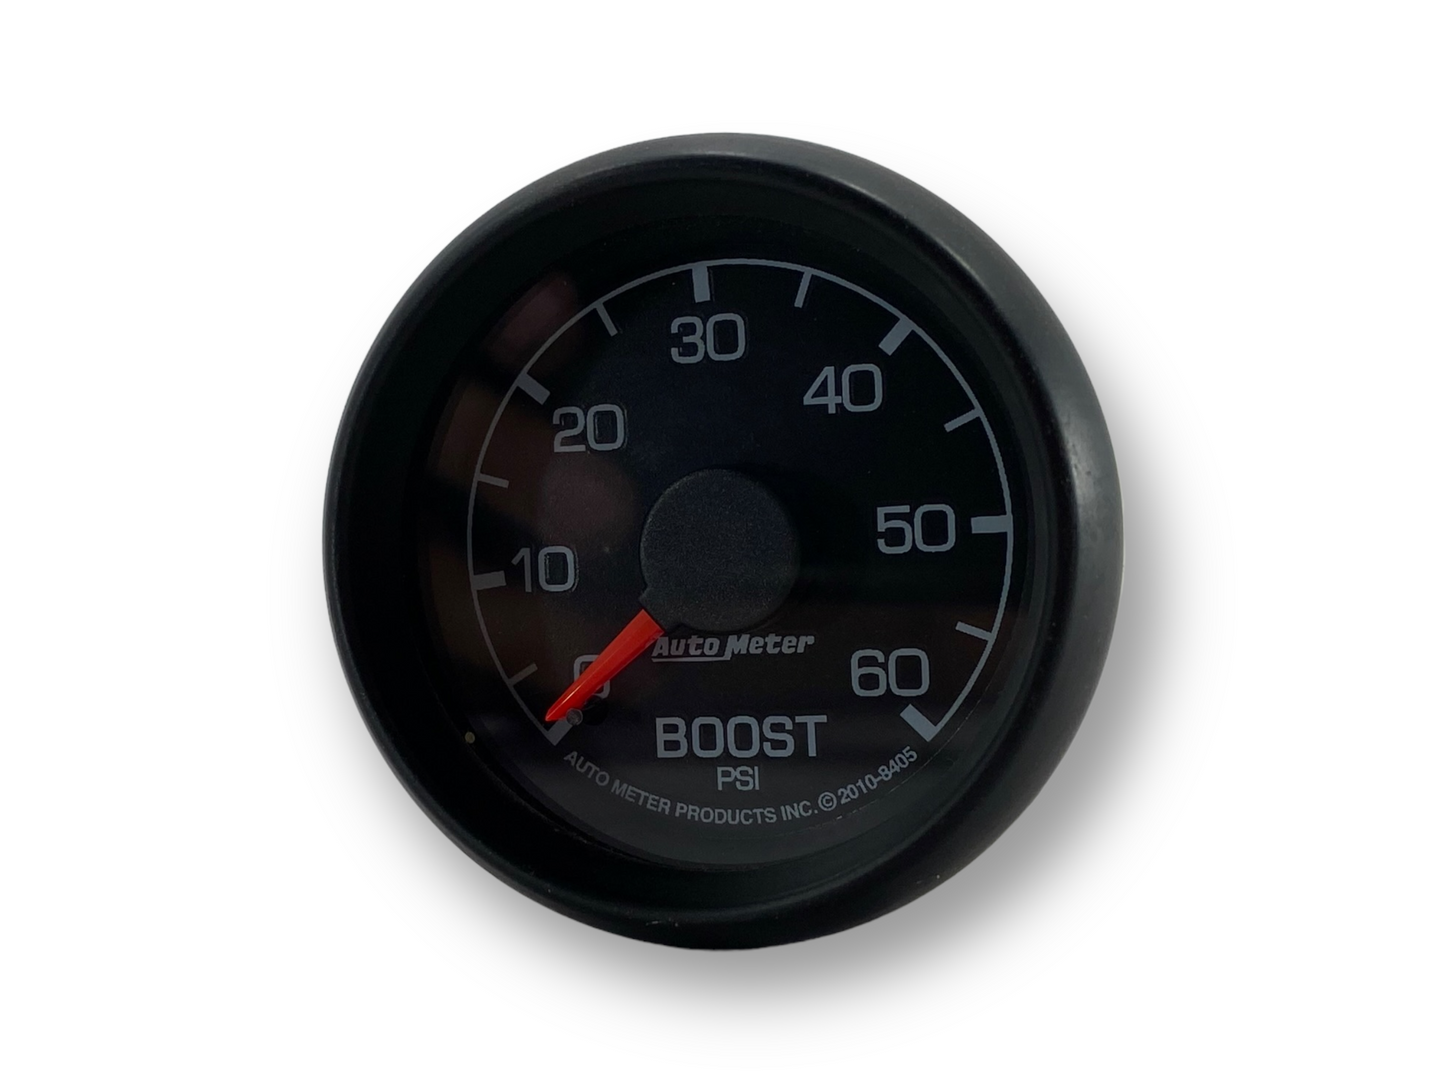 Autometer Boost Gauge Ford Factory Match 0-60 Psi Mechanical 8405